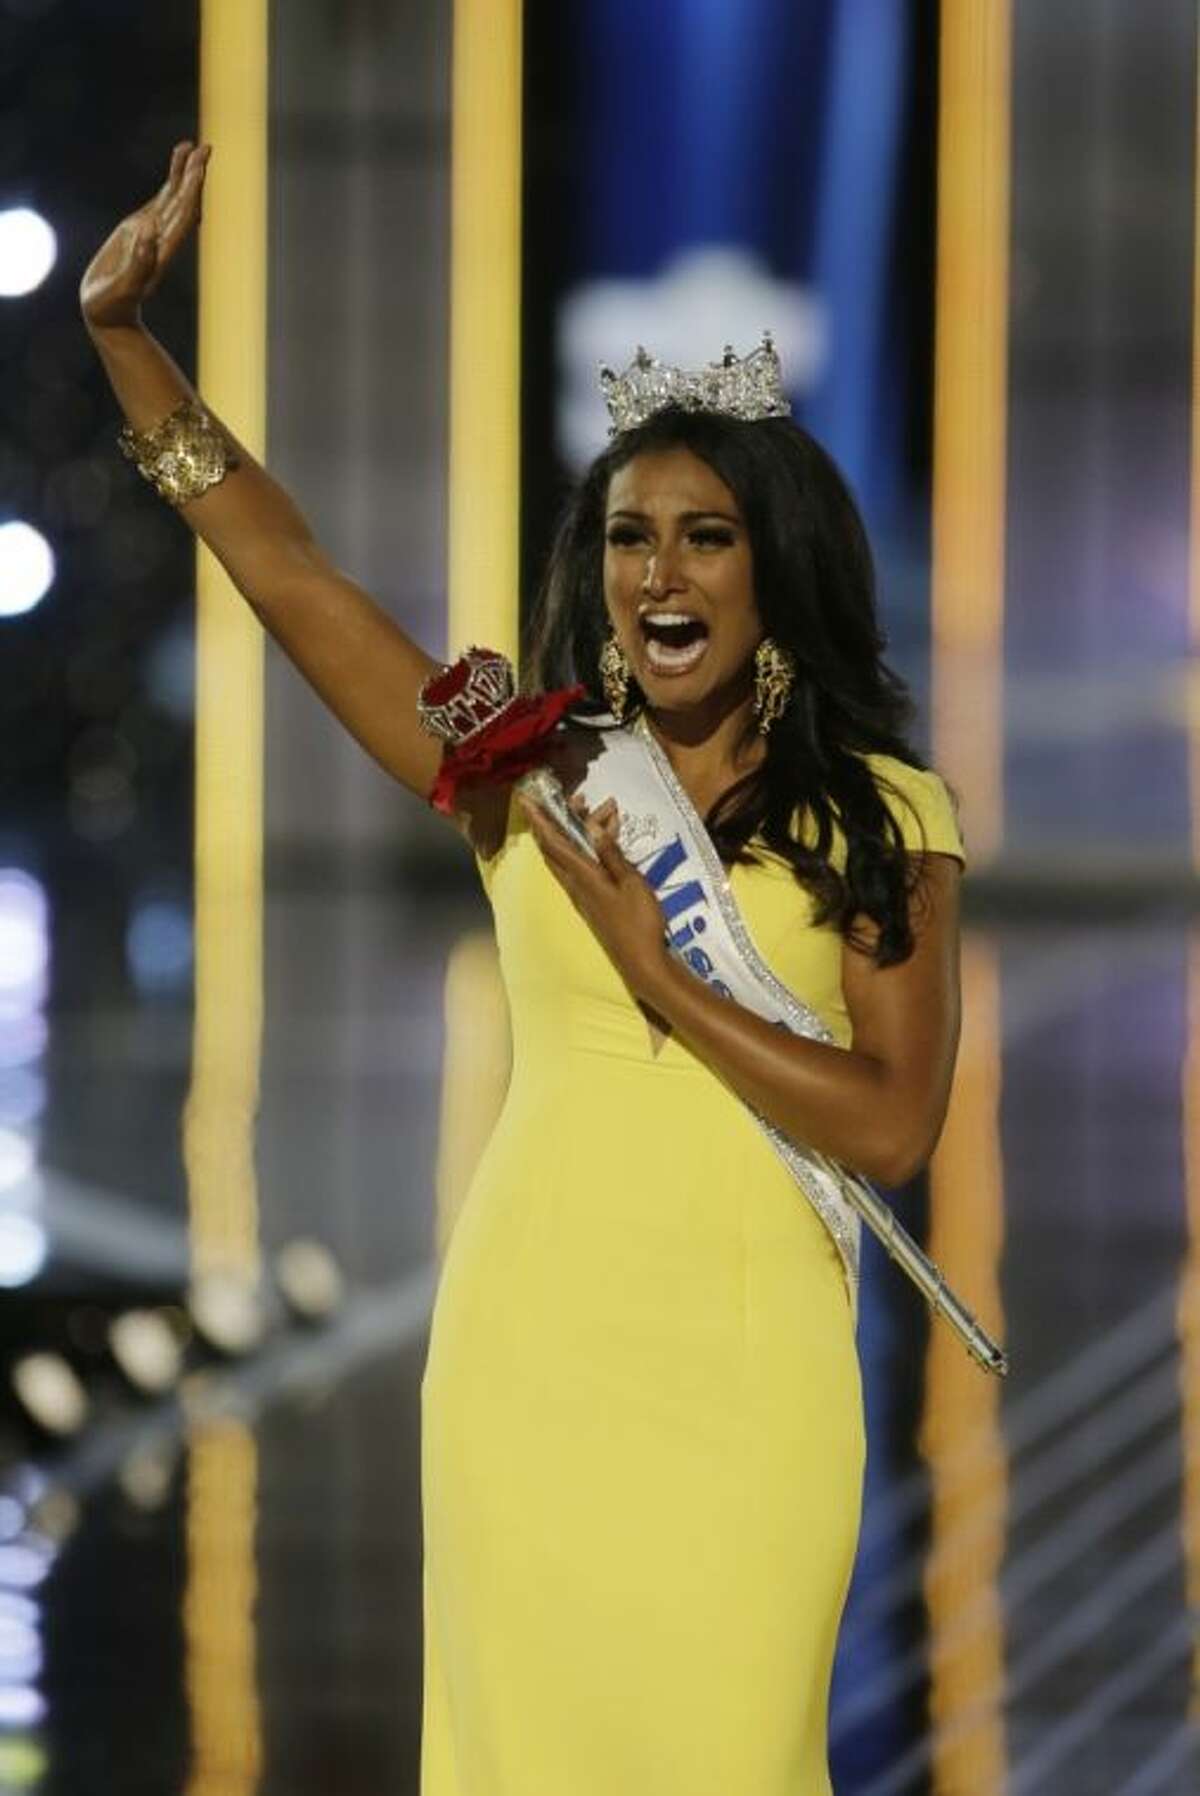 Miss New York Nina Davuluri walks down the runway after winning the the Miss America 2014 pageant, Sunday, Sept. 15, 2013, in Atlantic City, N.J.